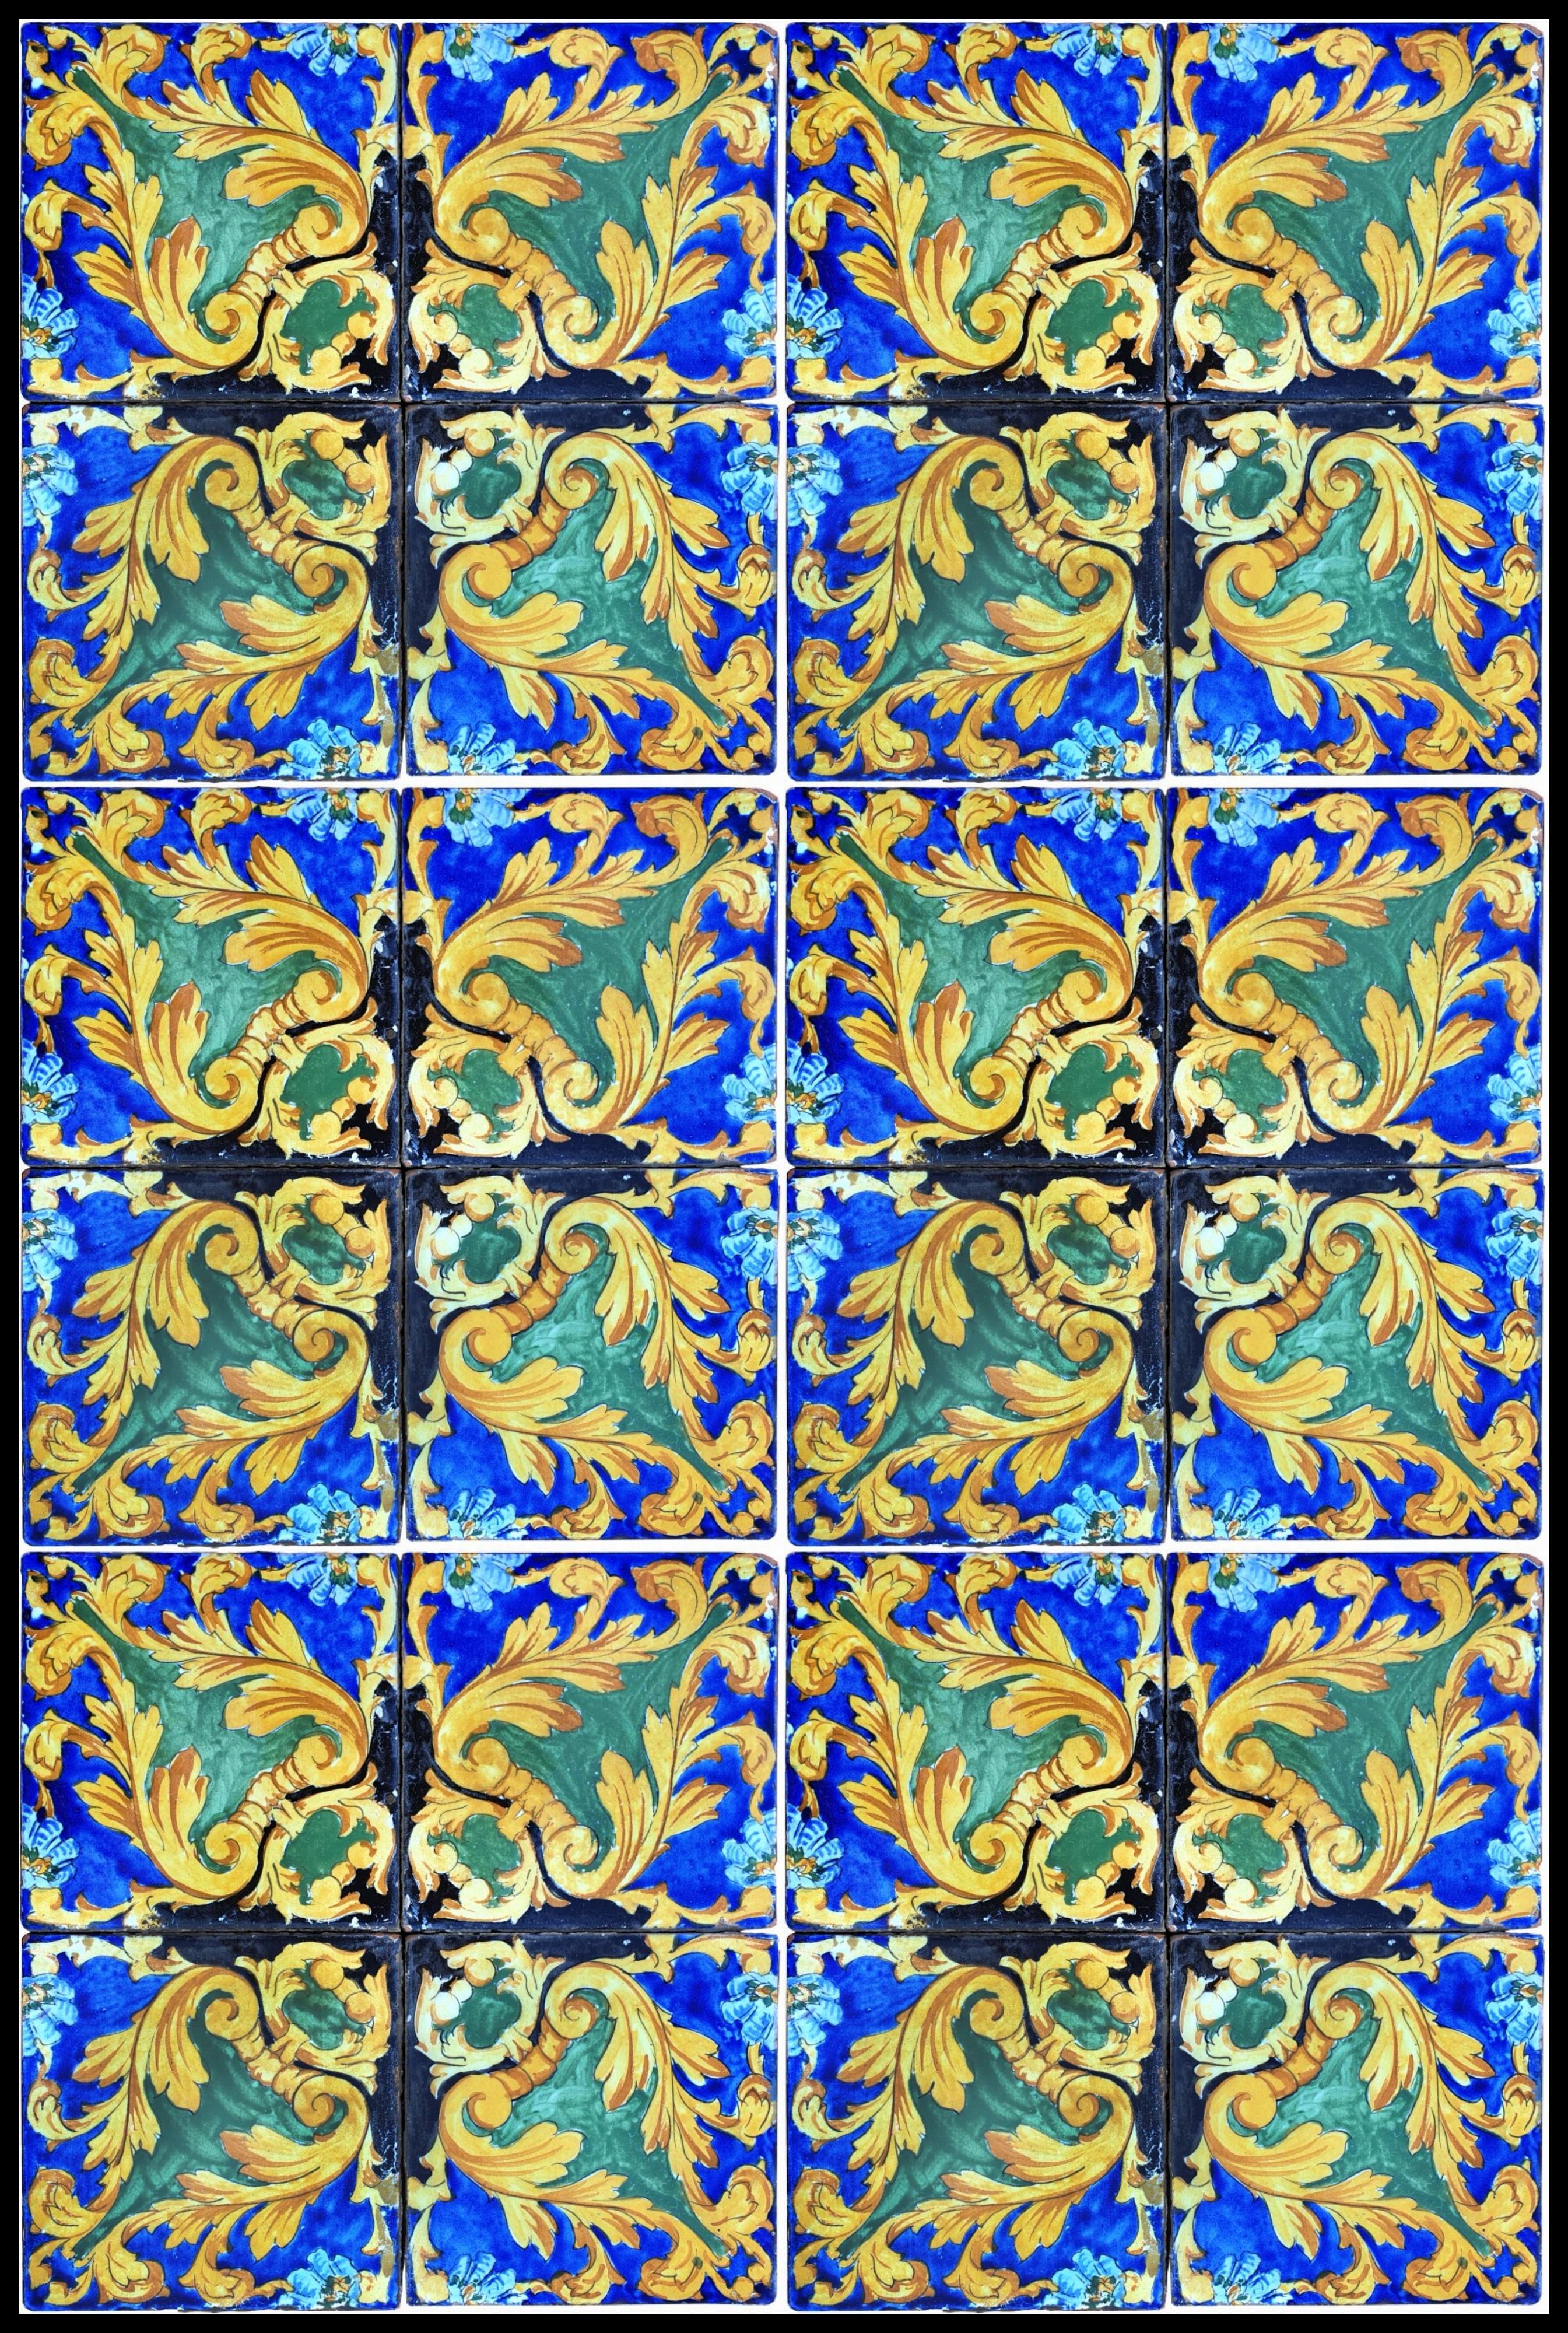 24 ANCIENT MAJOLICA TILES FROM THE LIBERTY ERA 1894 / 1910 Art Nouveau

Original white and manganese relief tile.
Relief tile.

AVAILABILITY OF 210 TILES

HEIGHT 80 cm
WIDTH 80 cm
THICKNESS 1.7 cm
WEIGHT 1.3 Kg
HISTORICAL PERIOD 1894 / 1910 Art